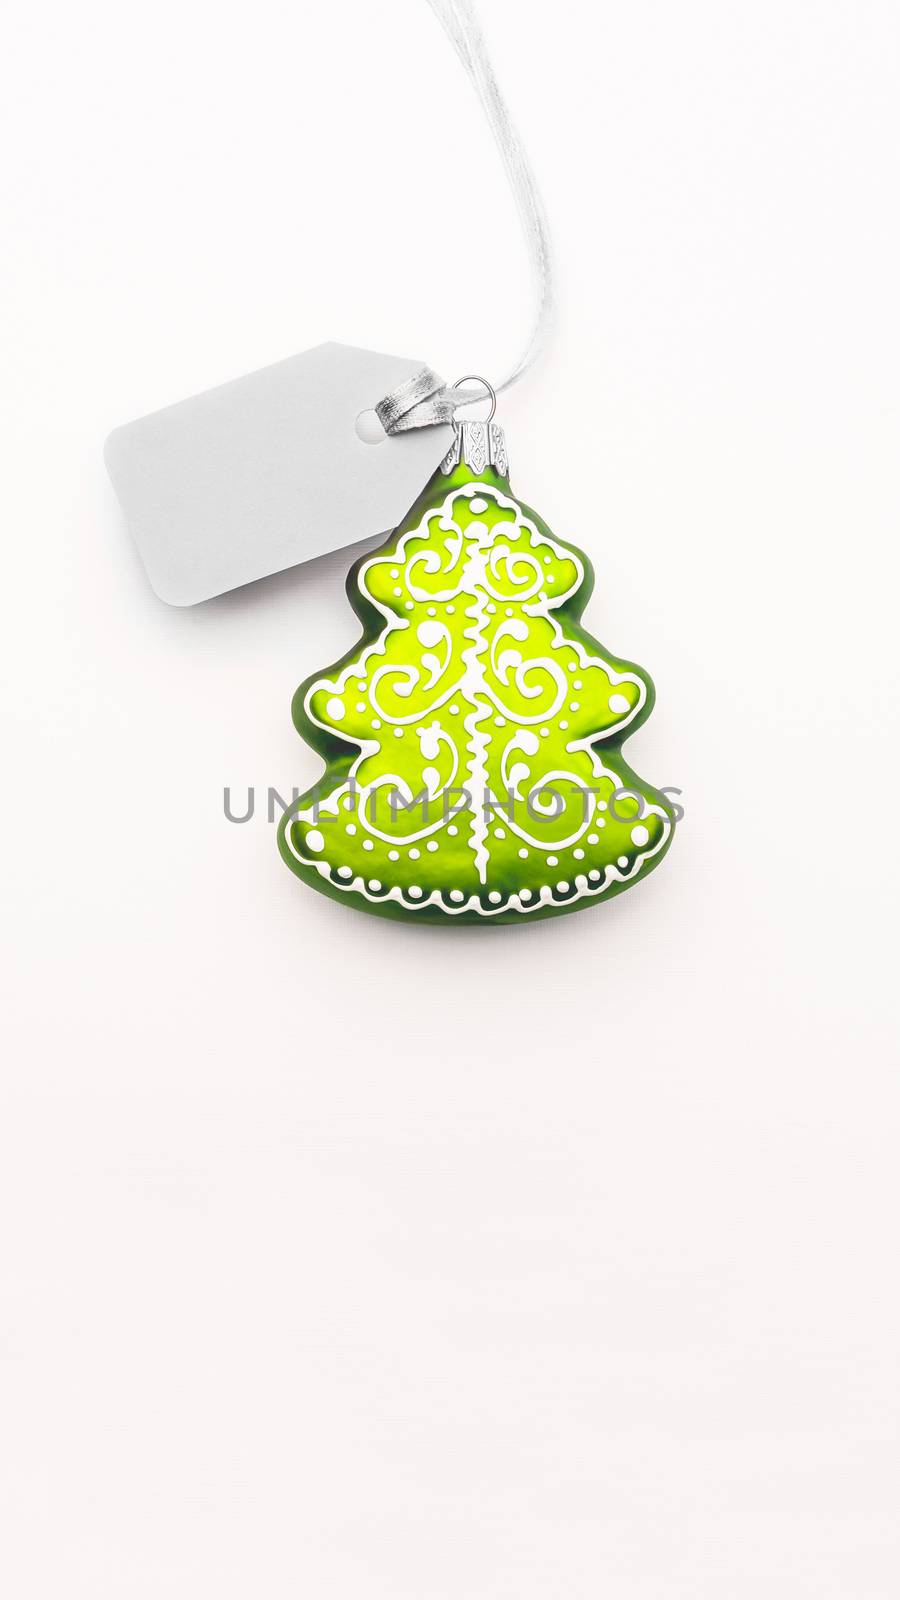 Decorative Christmas tree with grey price tag on white background. Clear label on silver thread. New Year symbol of sale and shopping. Top view, flat lay.